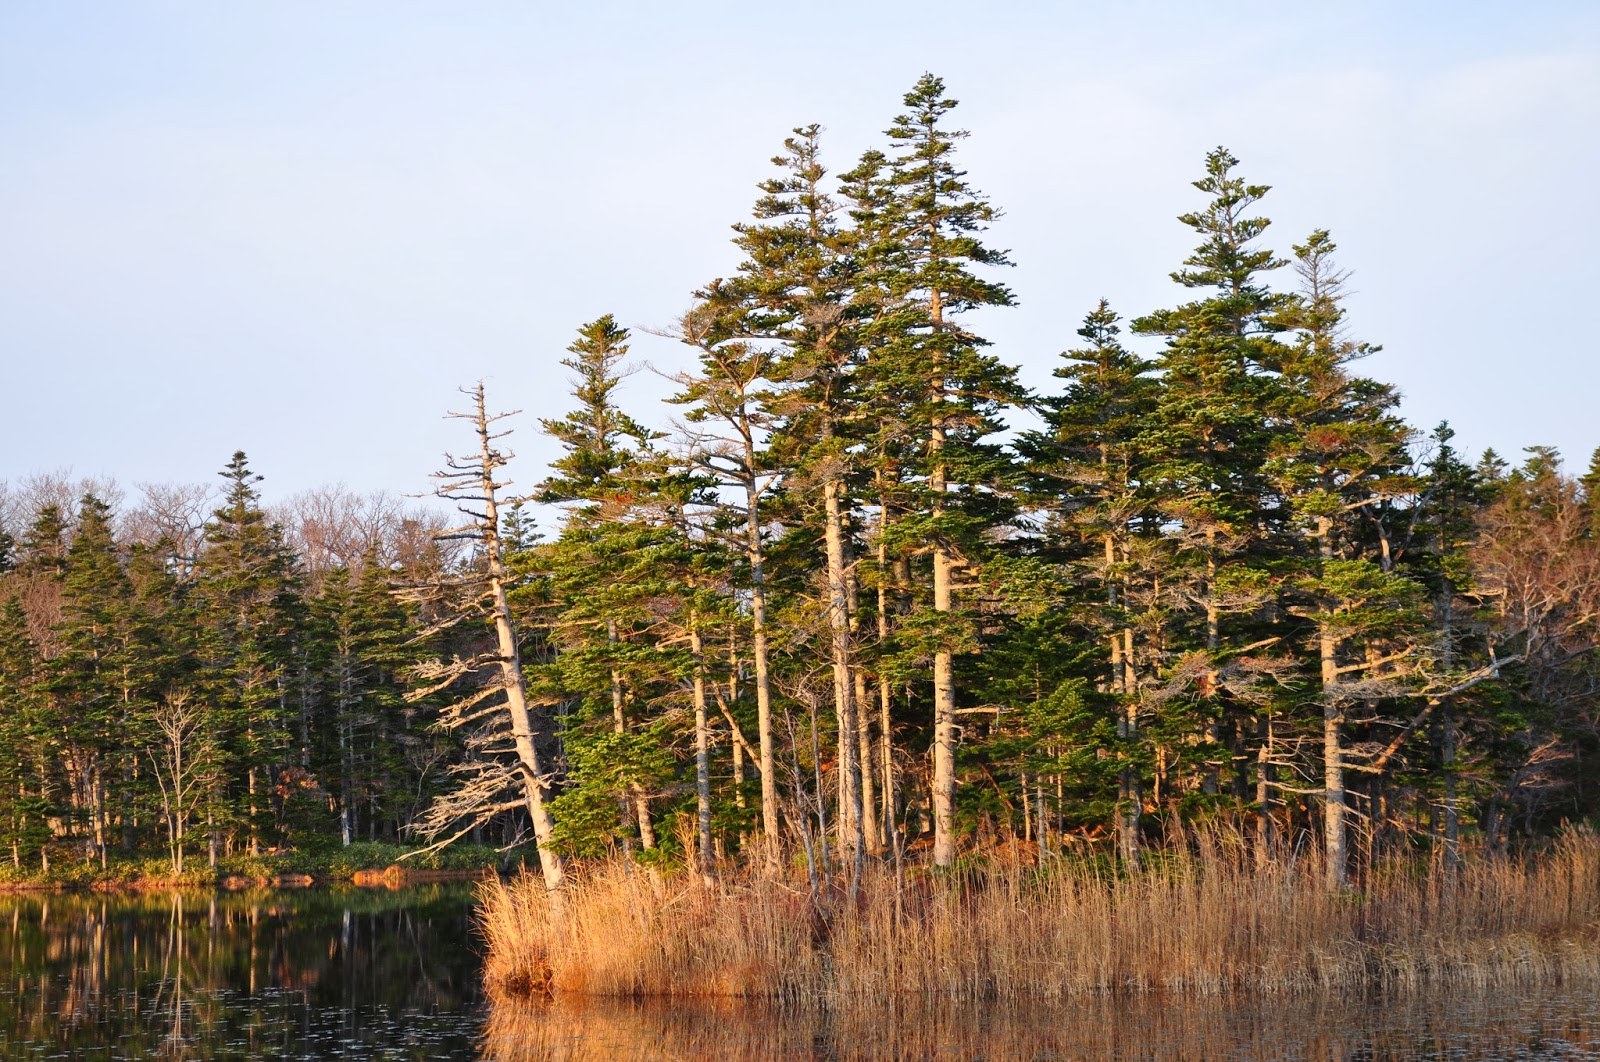 Tall pine trees looking across a lake with a marshy shore